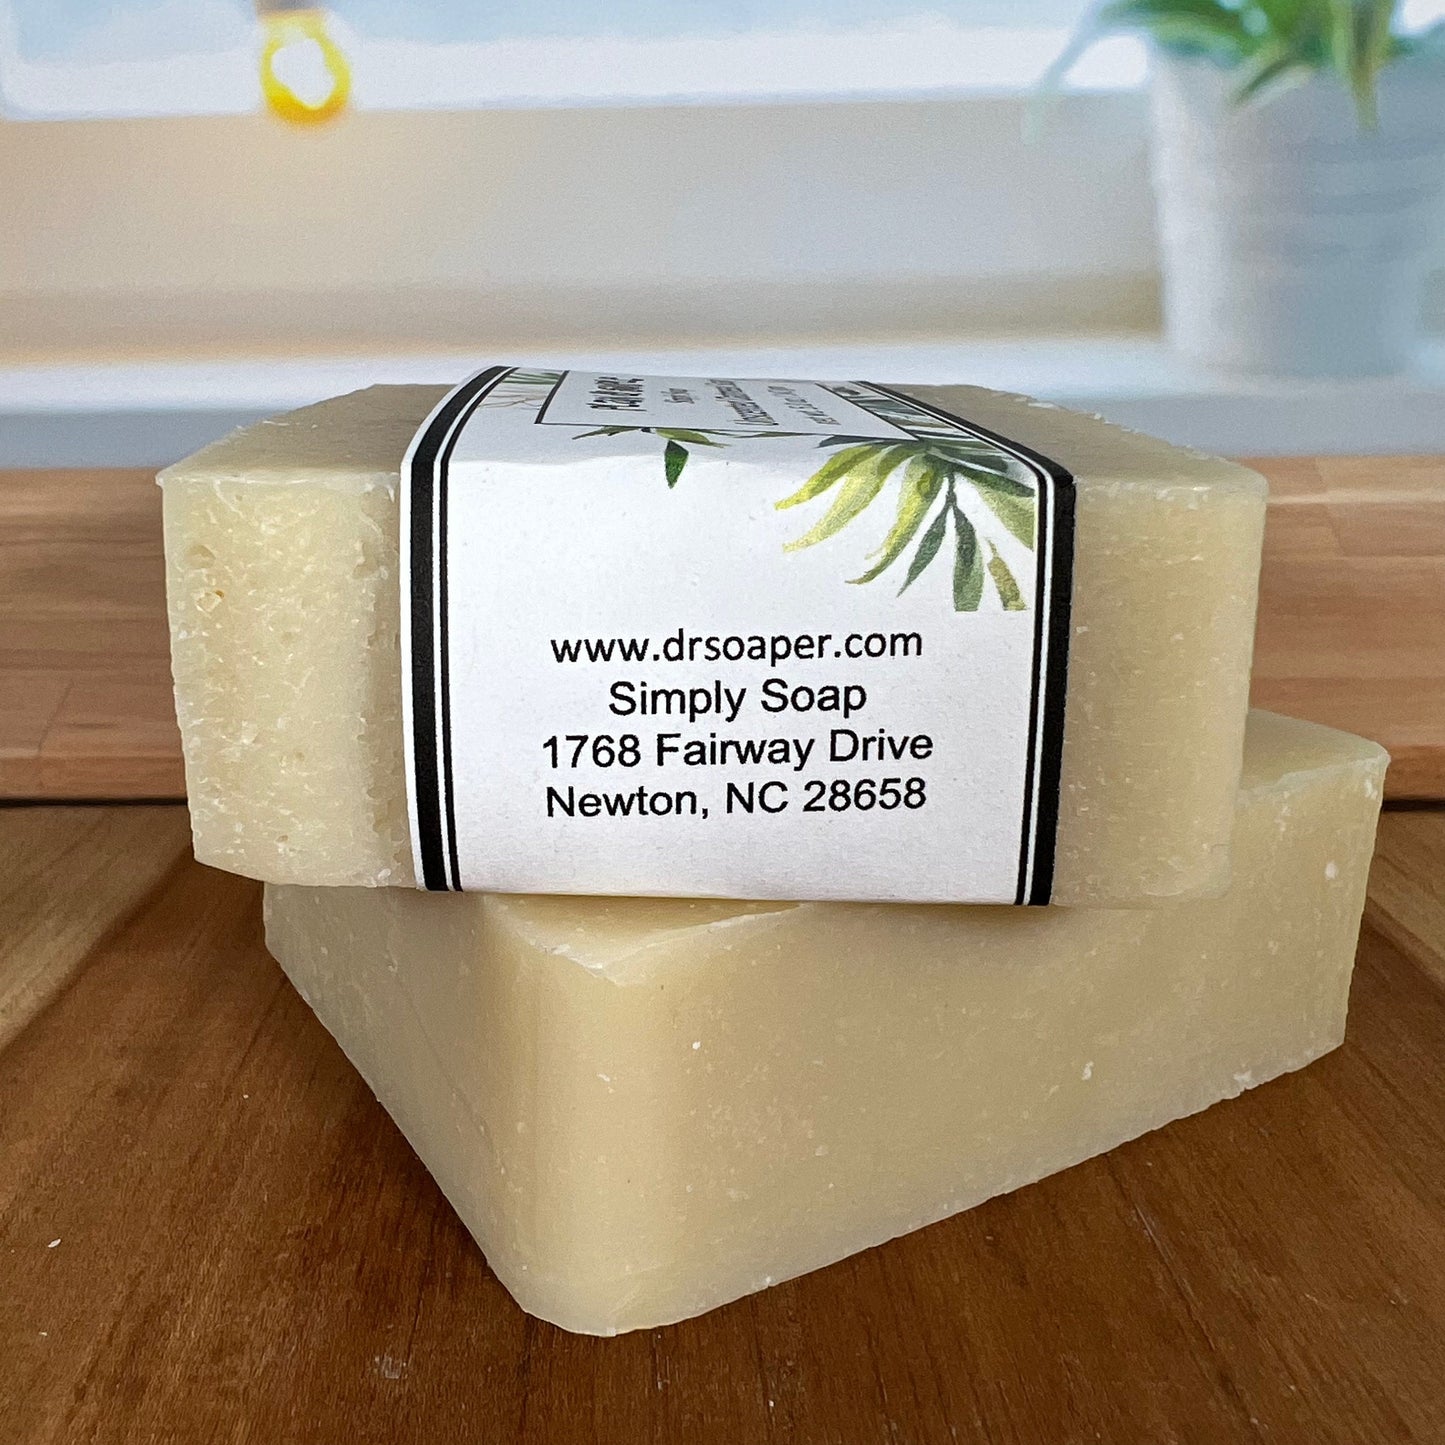 Unscented Oatmeal Soap for sensitive skin/babies. PALM FREE